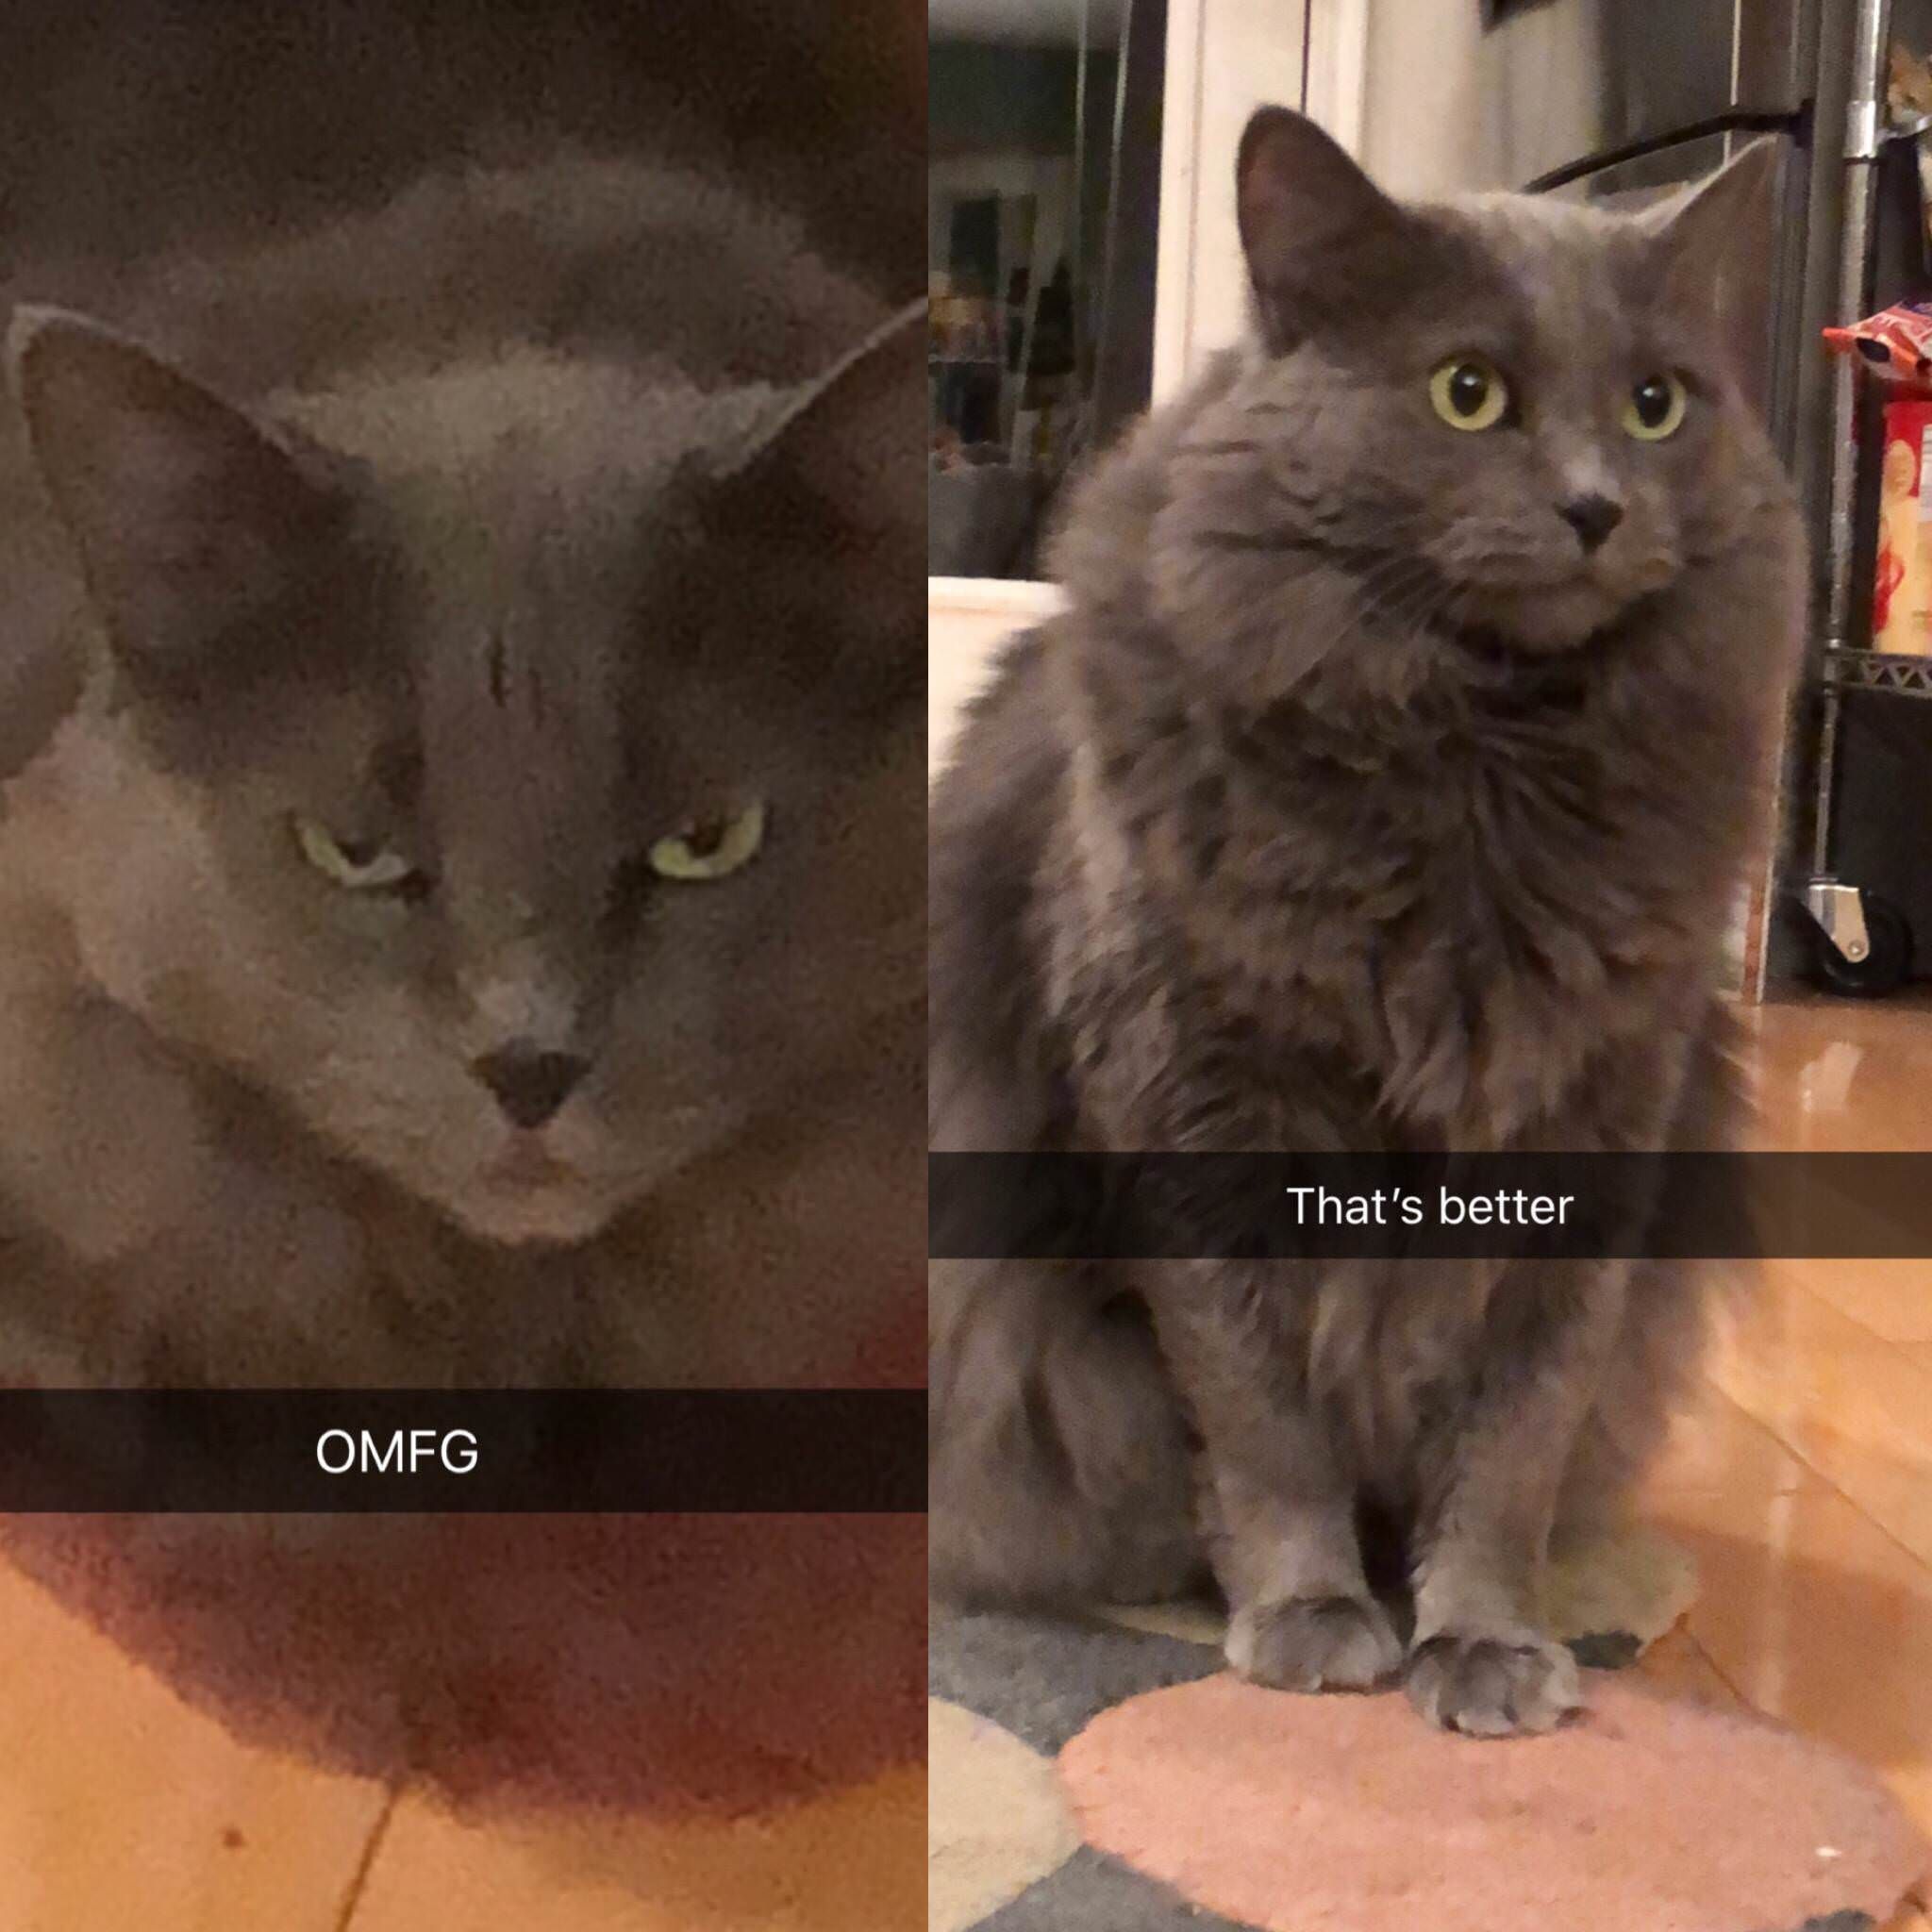 Took a picture of my cat before and after being fed